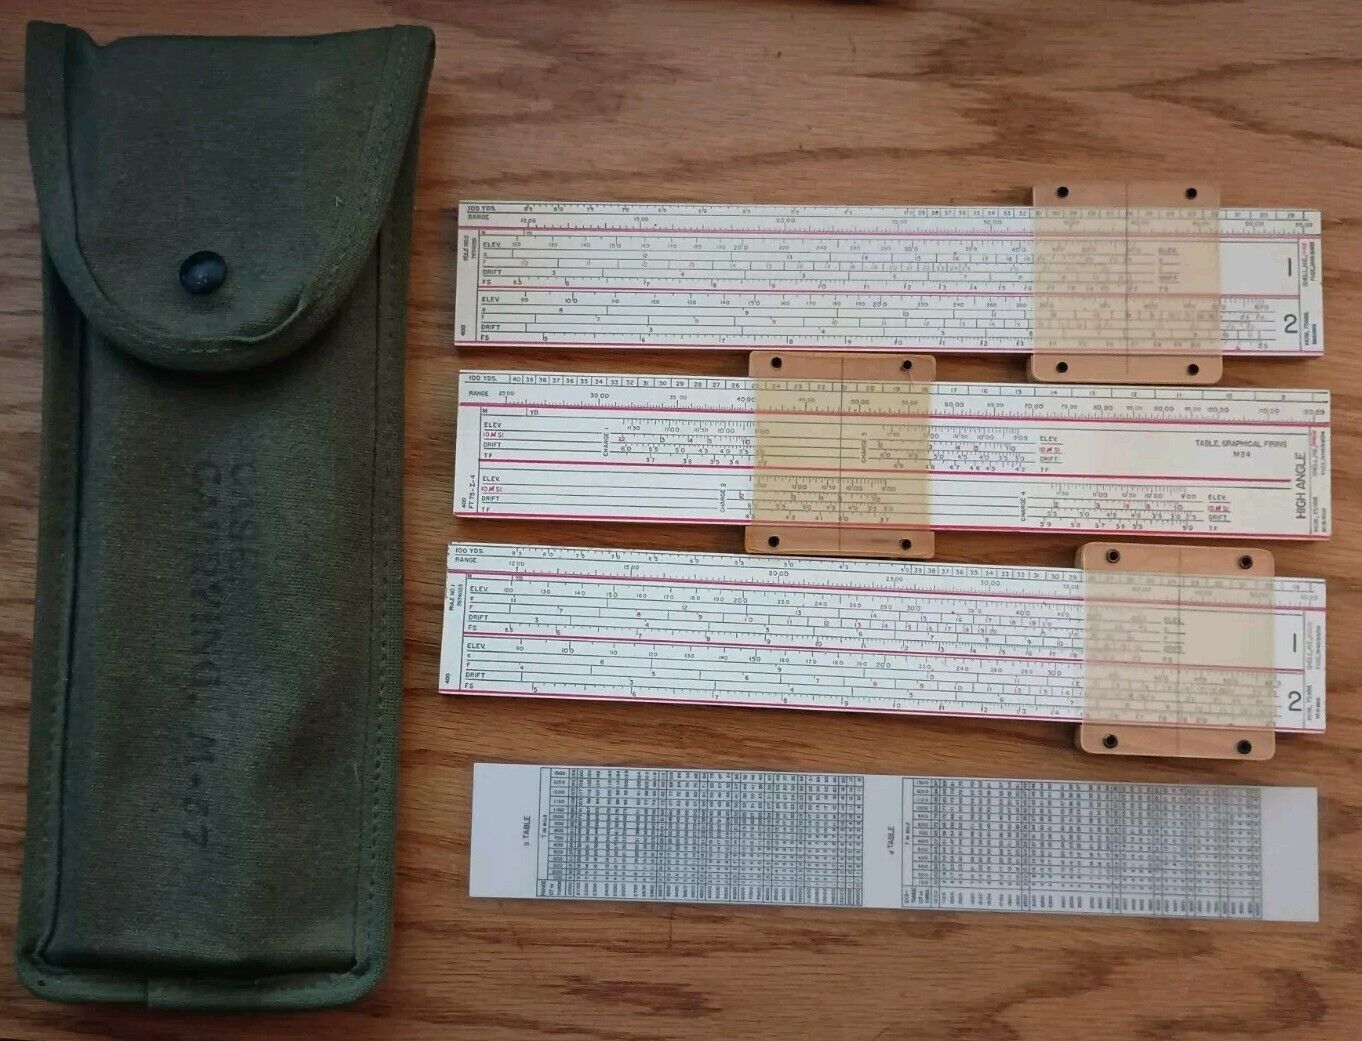 (3) WW2 Artillery Slide Rules & Firing Table For 75mm Howitzer in Carrying Case